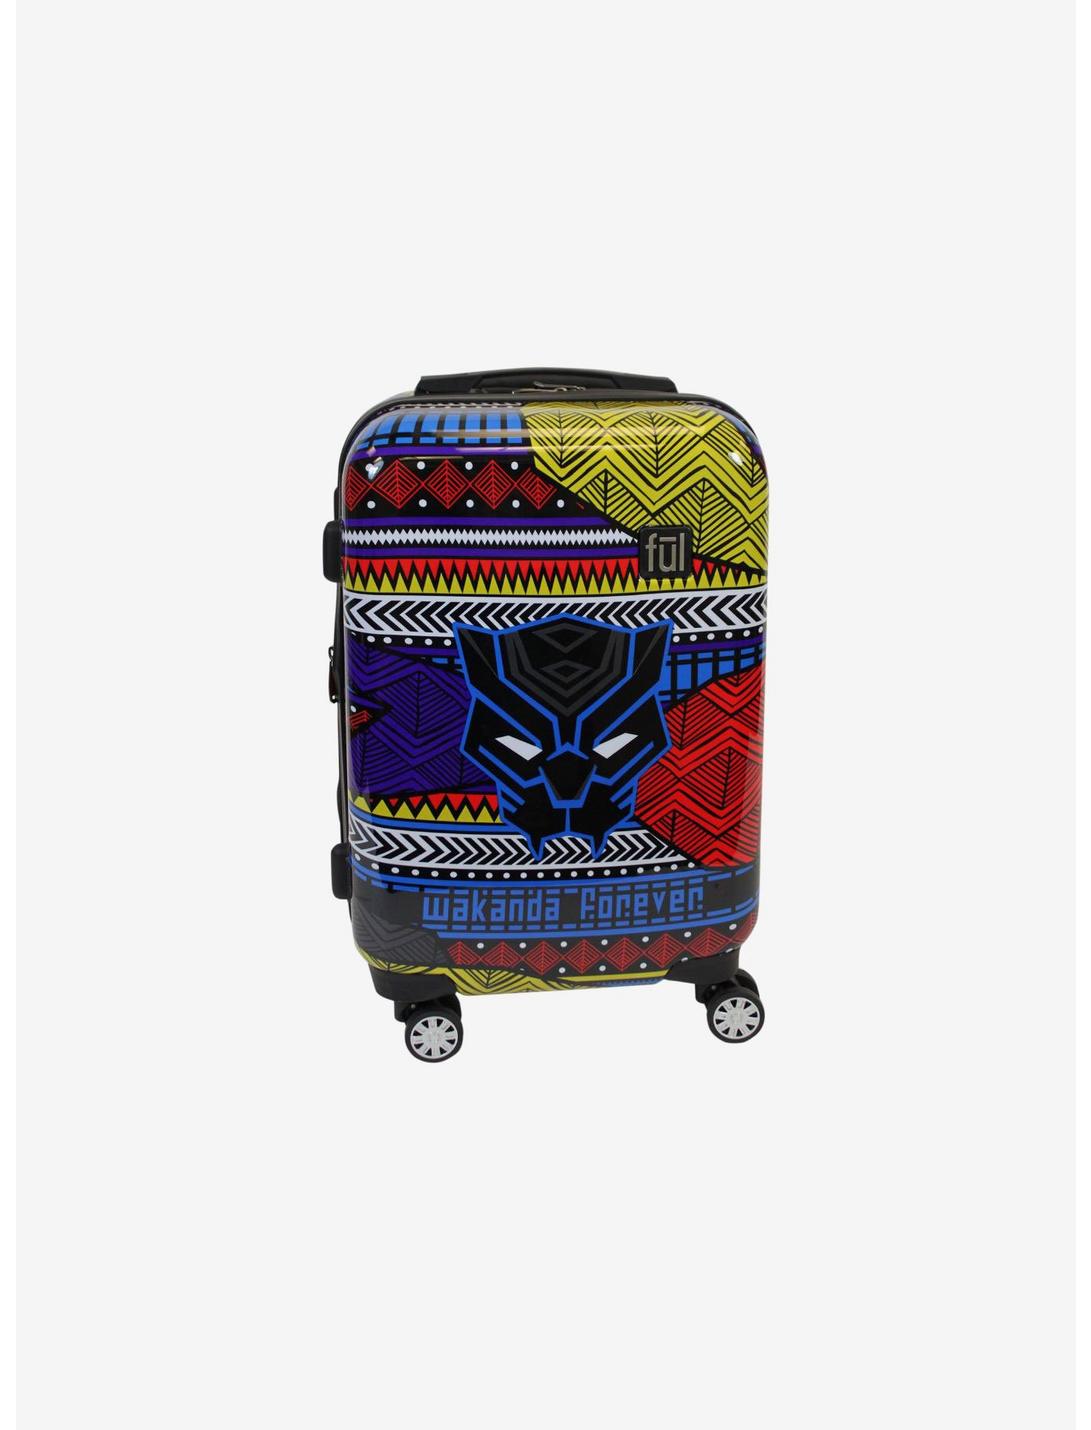 FUL Marvel Black Panther Tribal Art 21 Inch Hard Sided Rolling Luggage, , hi-res